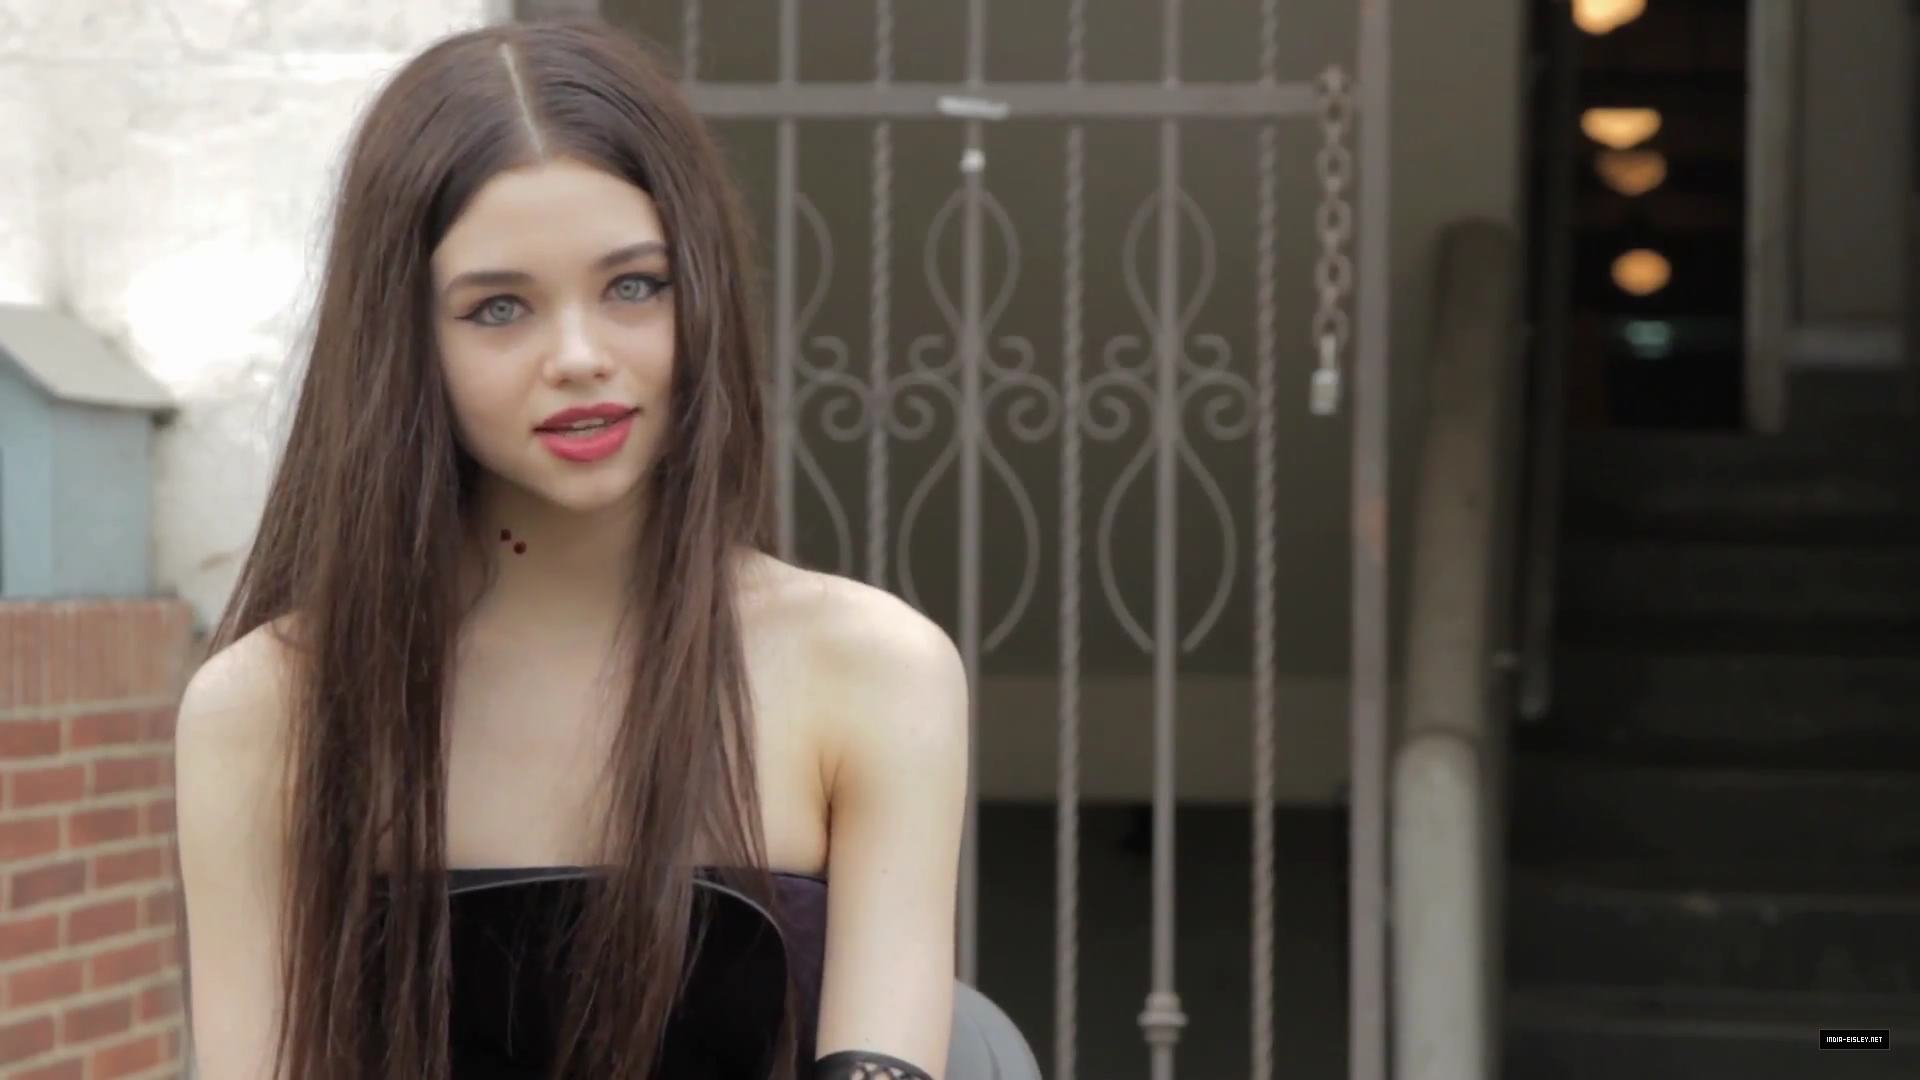 49 India Eisley Nude Pictures Can Make You Submit To Her Glitzy Looks 13